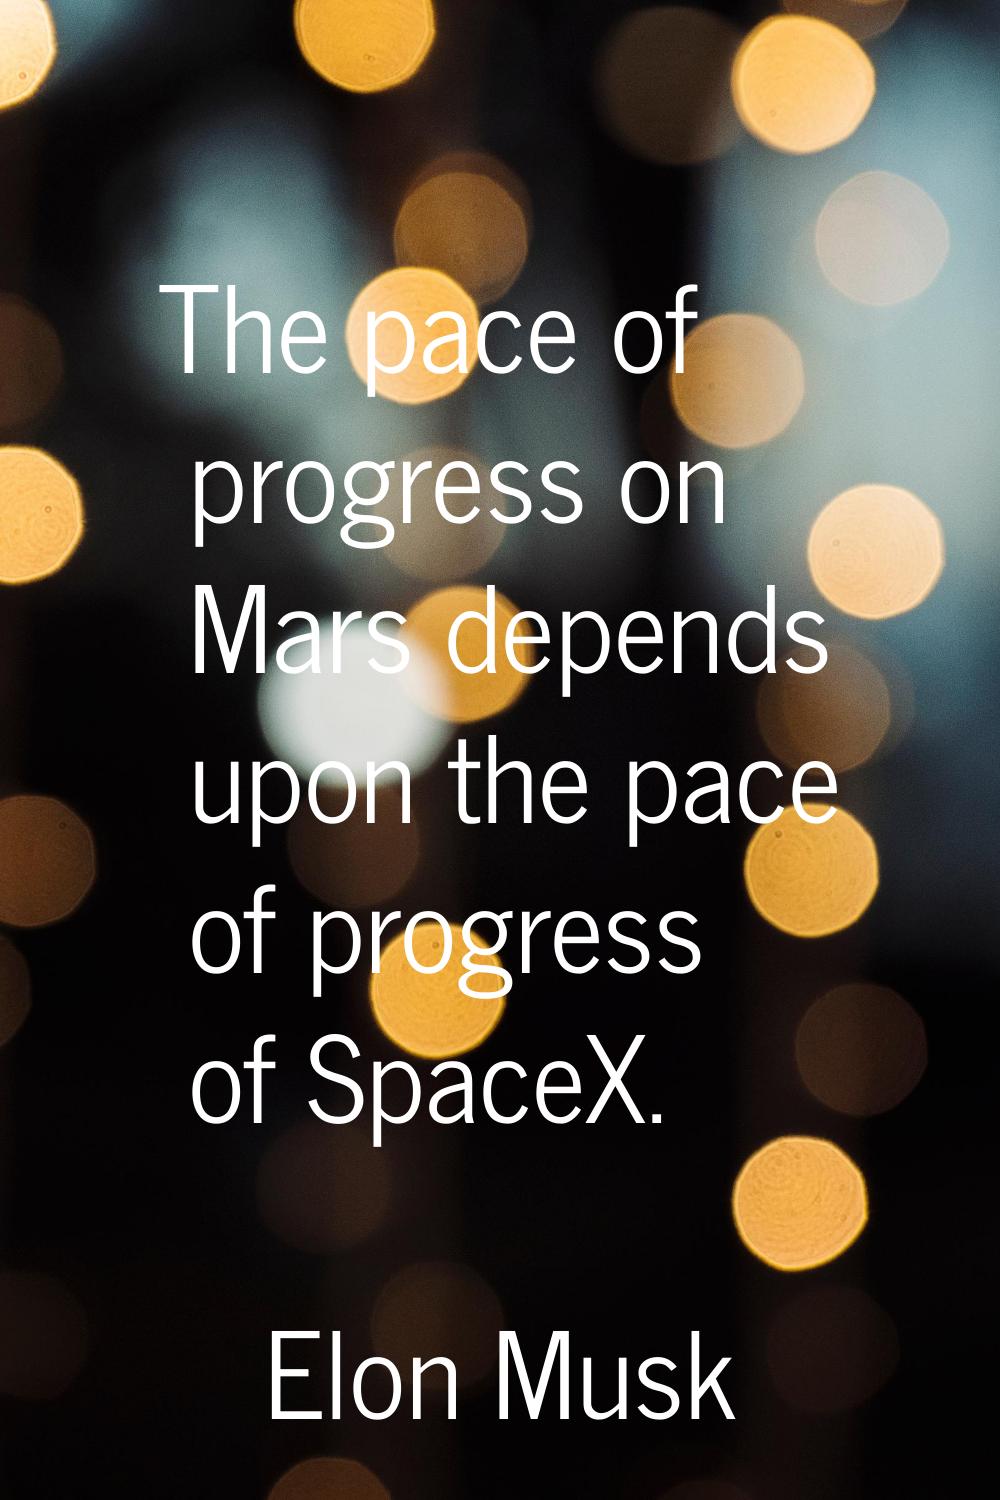 The pace of progress on Mars depends upon the pace of progress of SpaceX.